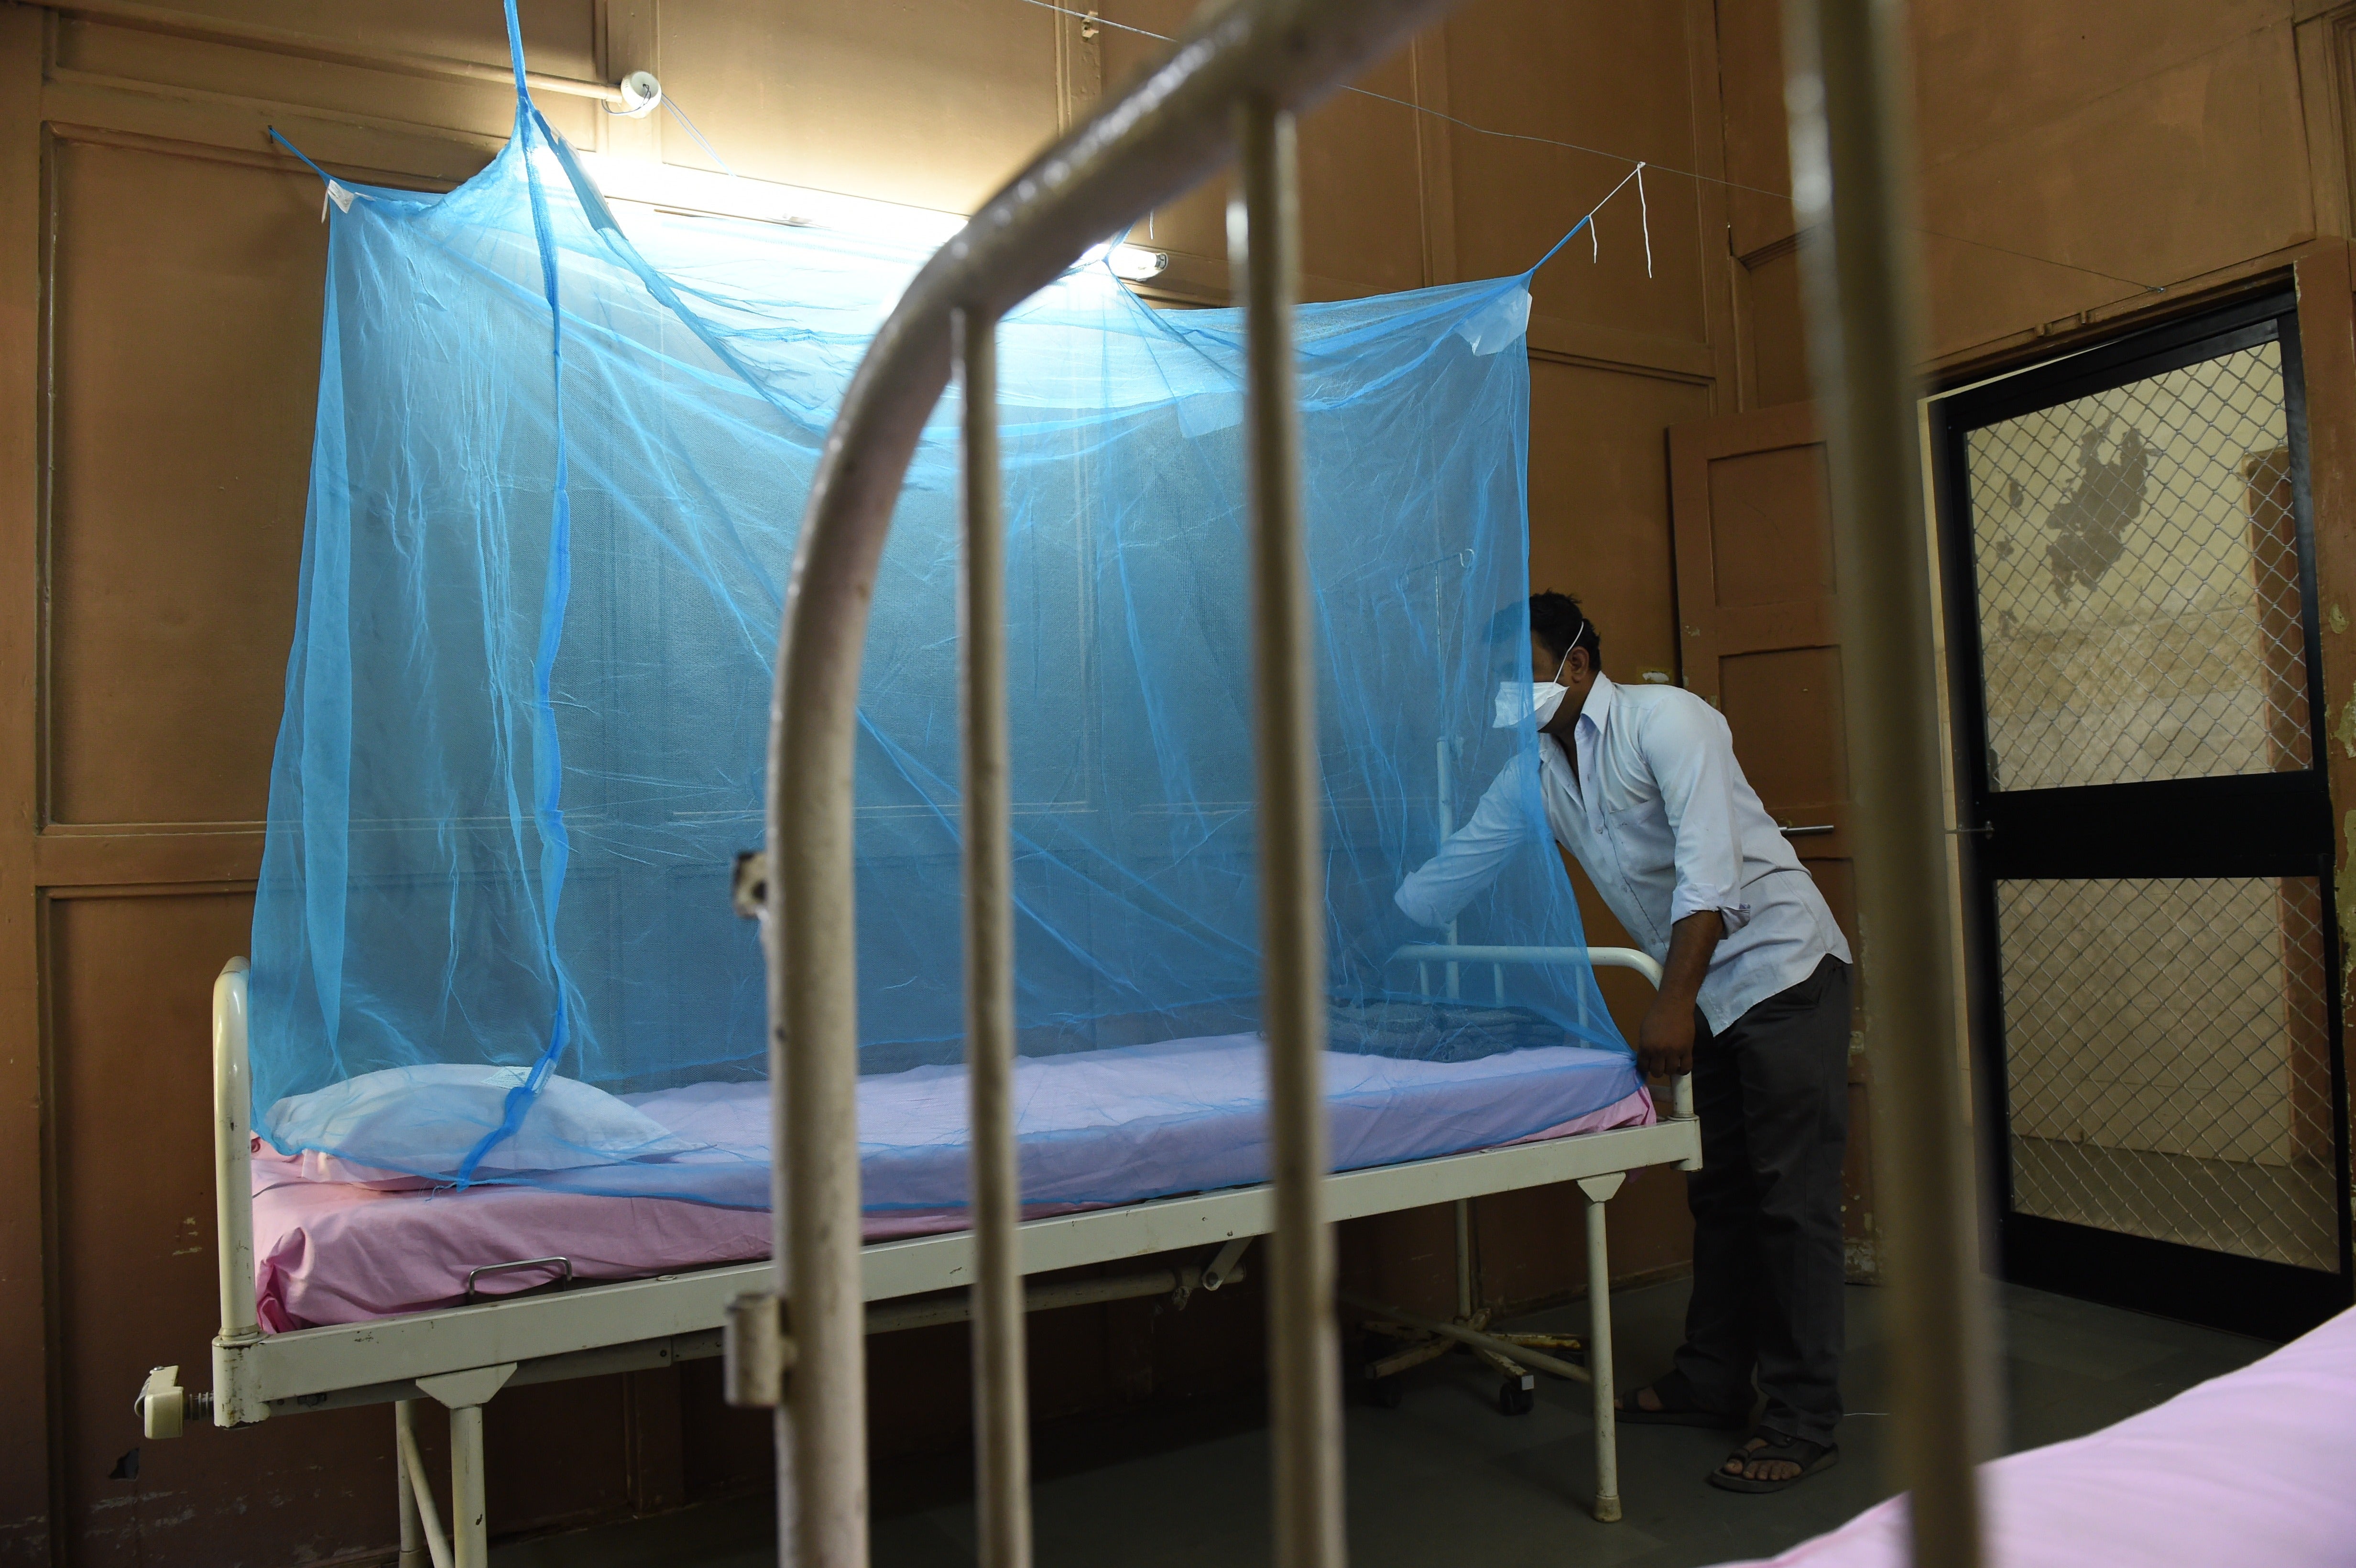 File: An attendant places a mosquito net at an isolation ward for Zika virus patients at a hospital in India’s Ahmedabad city on 27 October 2018